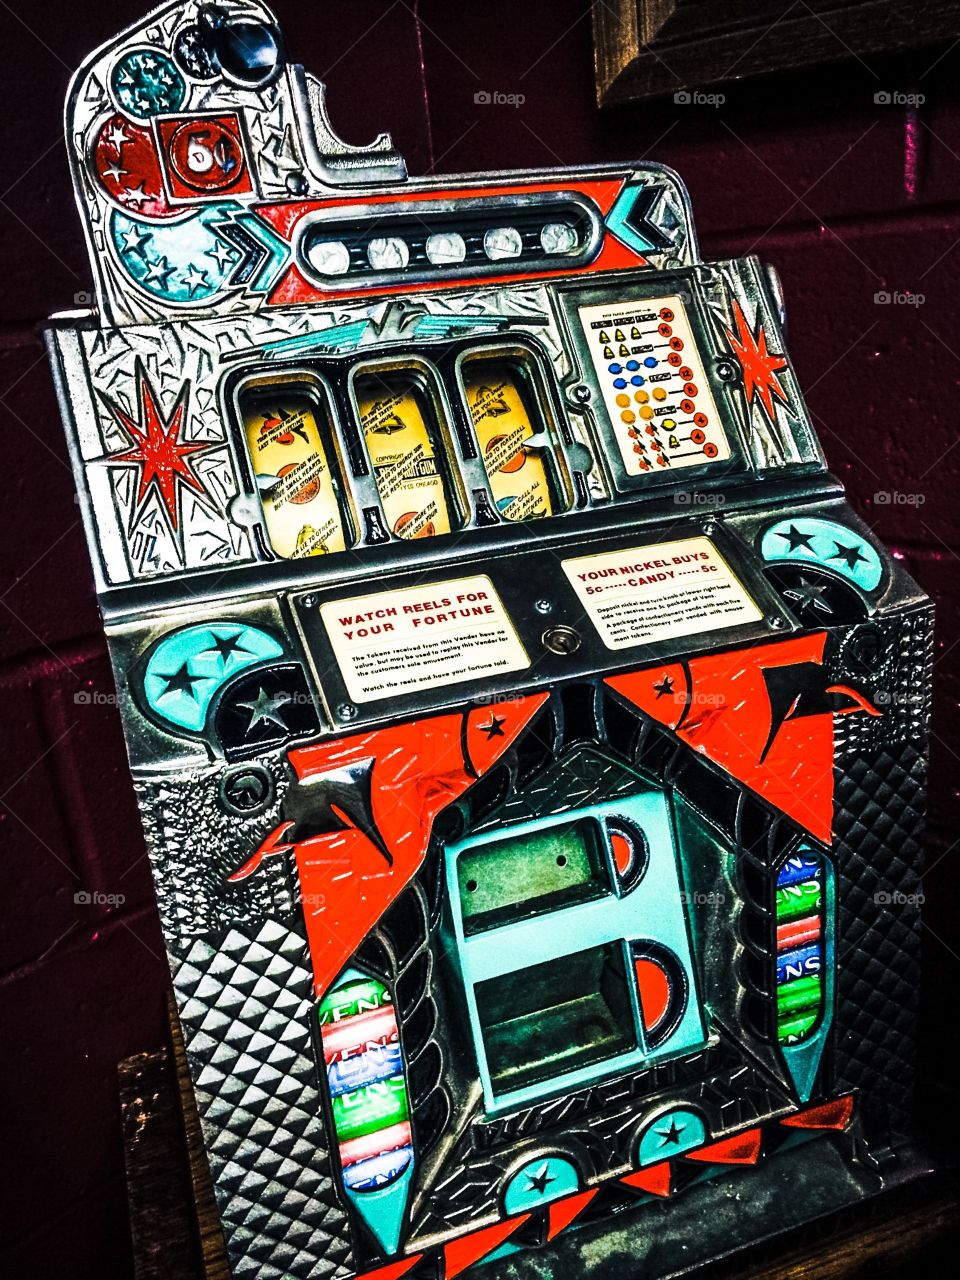 Vintage real reel slot machine. This one armed bandit is a classic. Heavy metal, shiny, chrome designed to break your heart and separate you from all your hard earned money money. Luck has nothing to do with it!